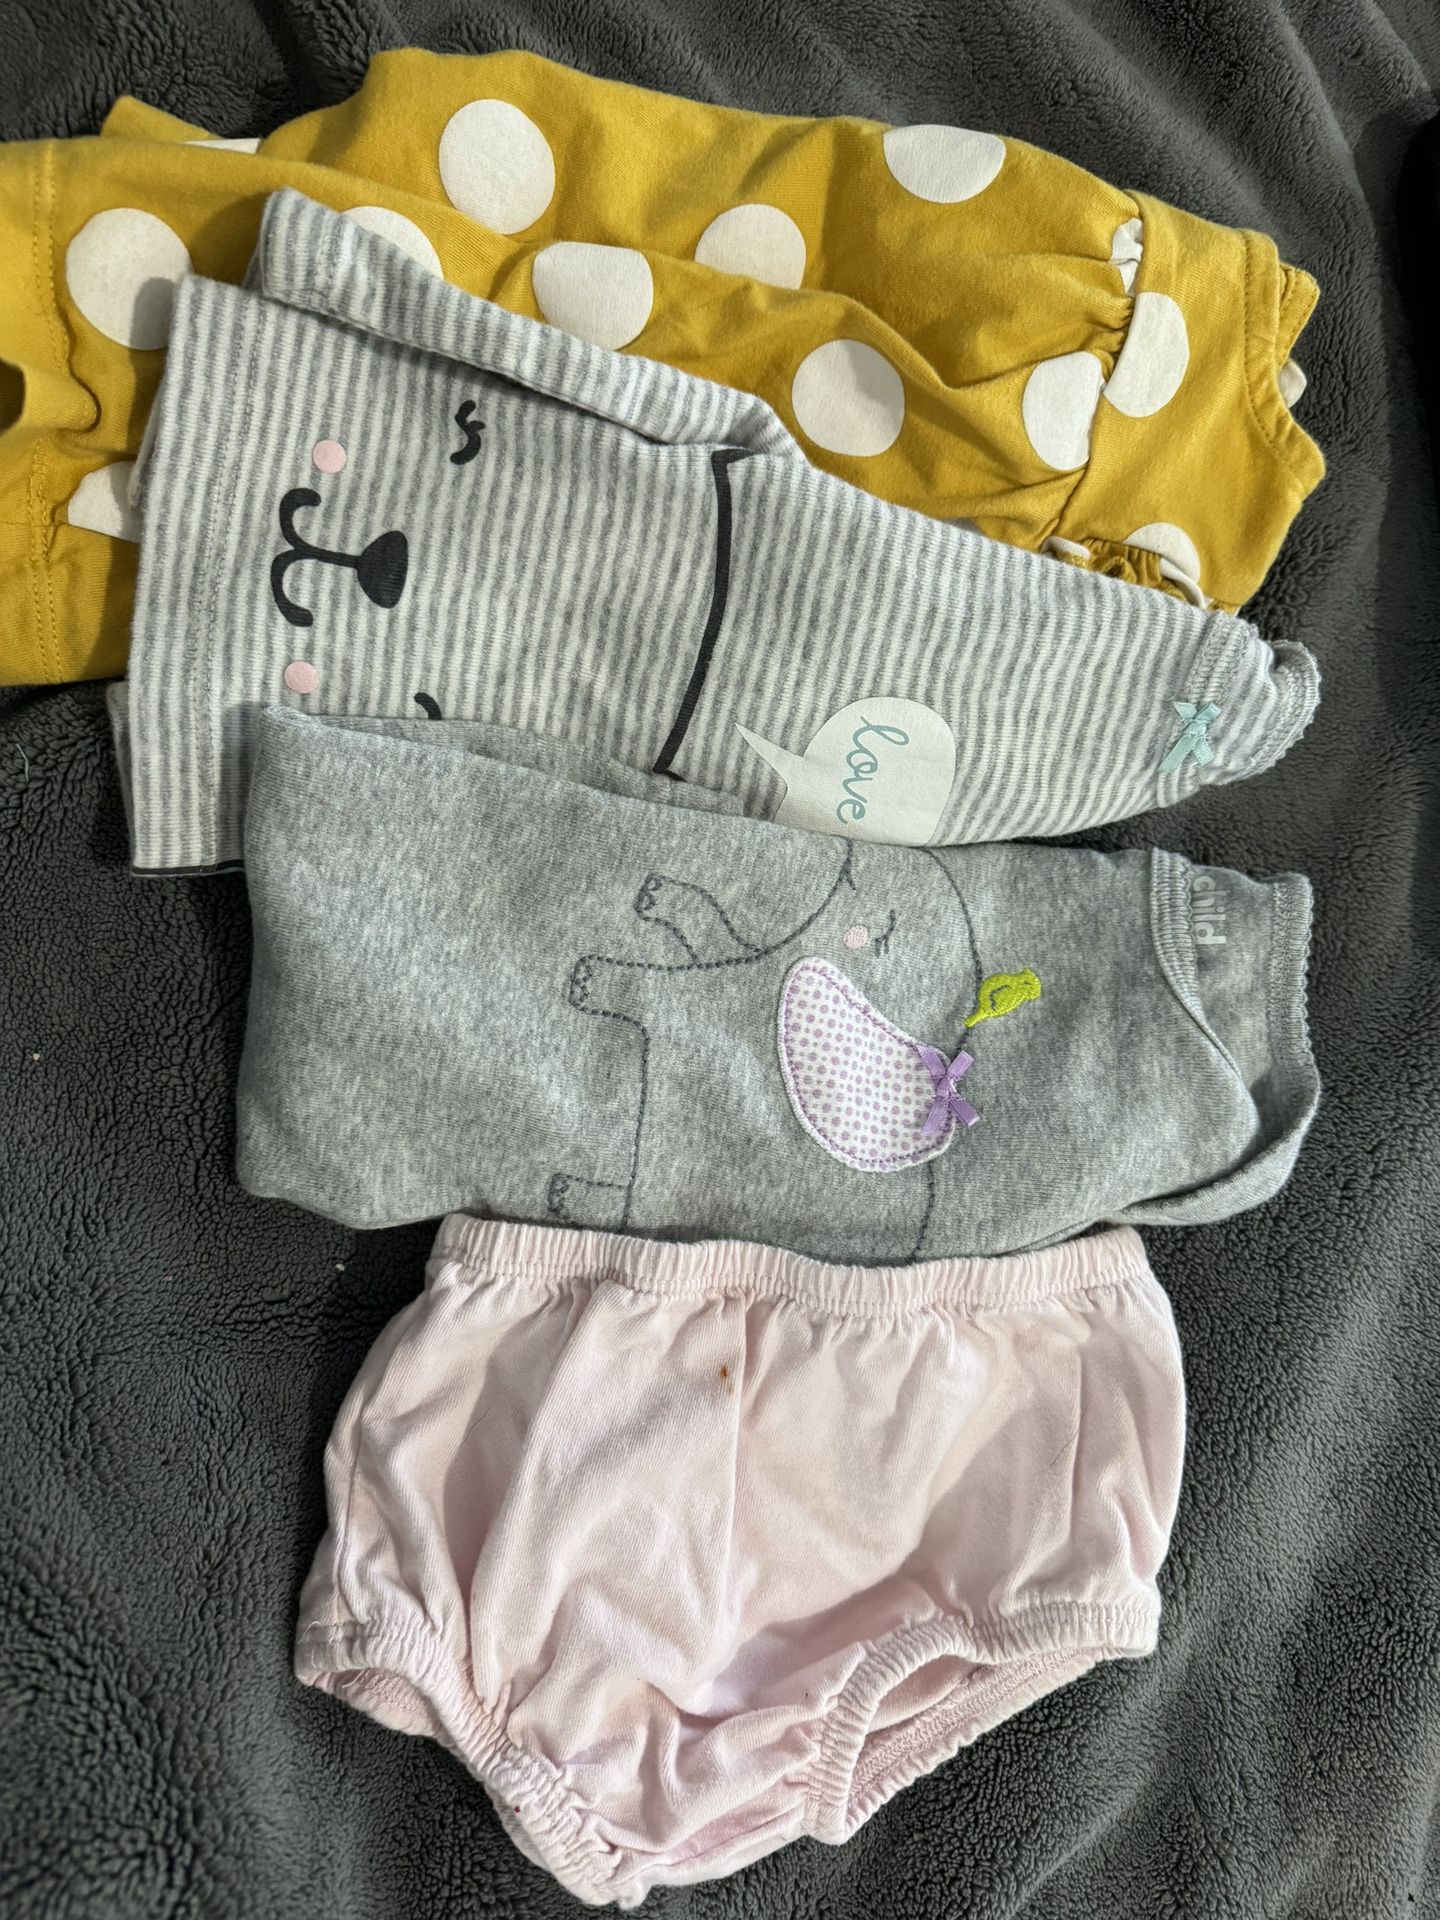 Free 9 Month Old Clothes 